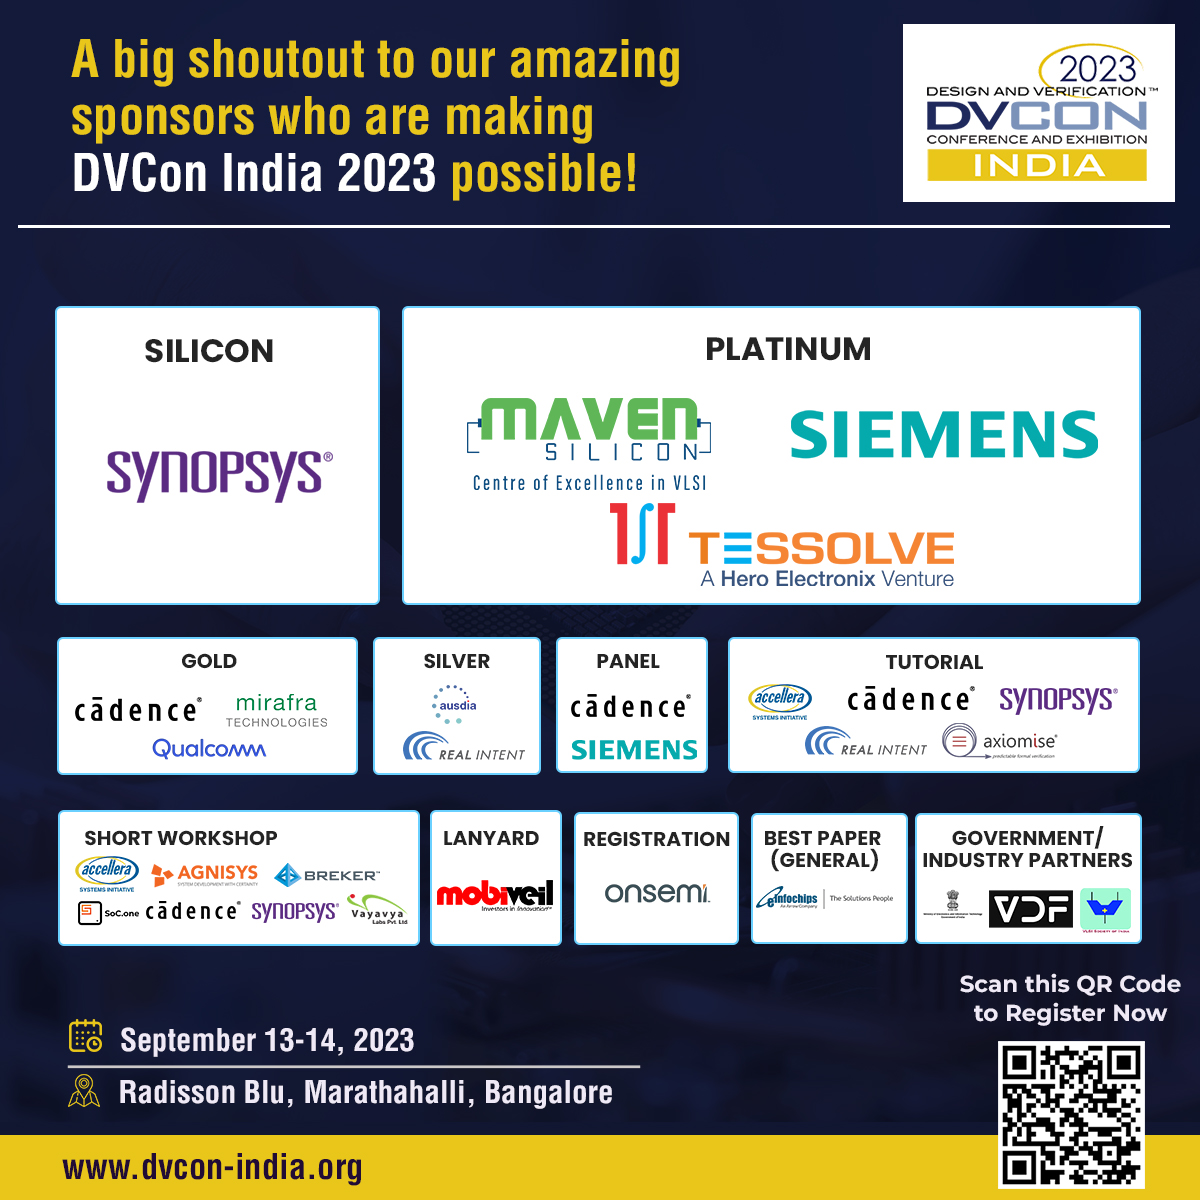 Big thanks to our incredible sponsors for making DVCon possible! Your support drives innovation and excellence in tech.

If you still have not registered for the DVCon India 2023, here is the link, lnkd.in/dCXKNvYD

#DVCon #DVCon2023